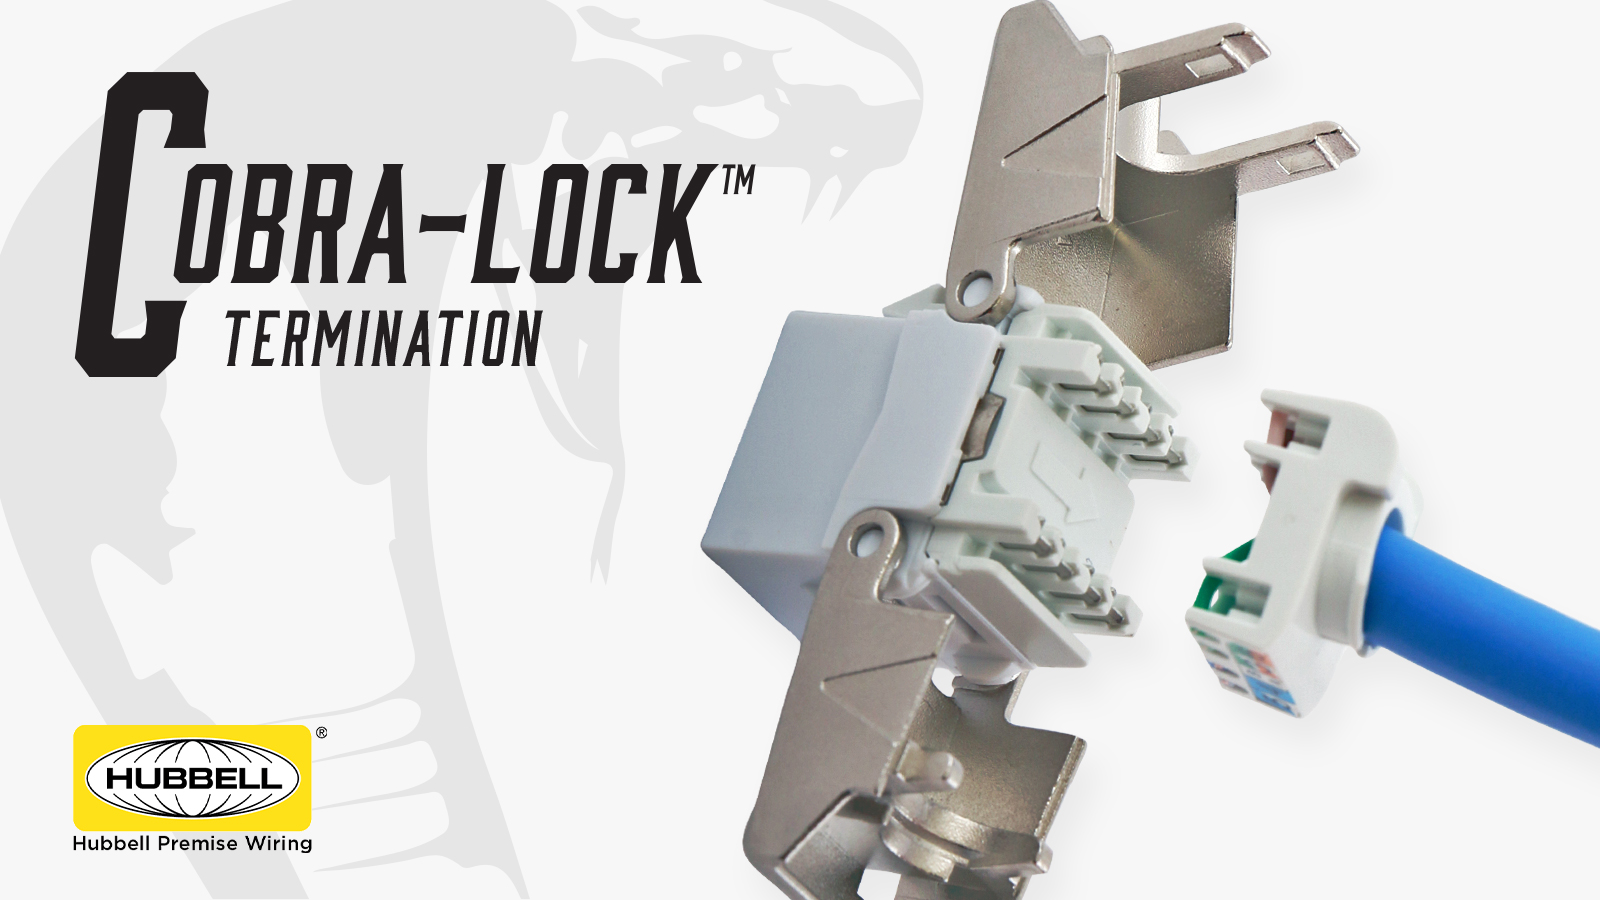 Fast, Reliable, & Efficient Cat 6A Termination with Cobra-Lock™